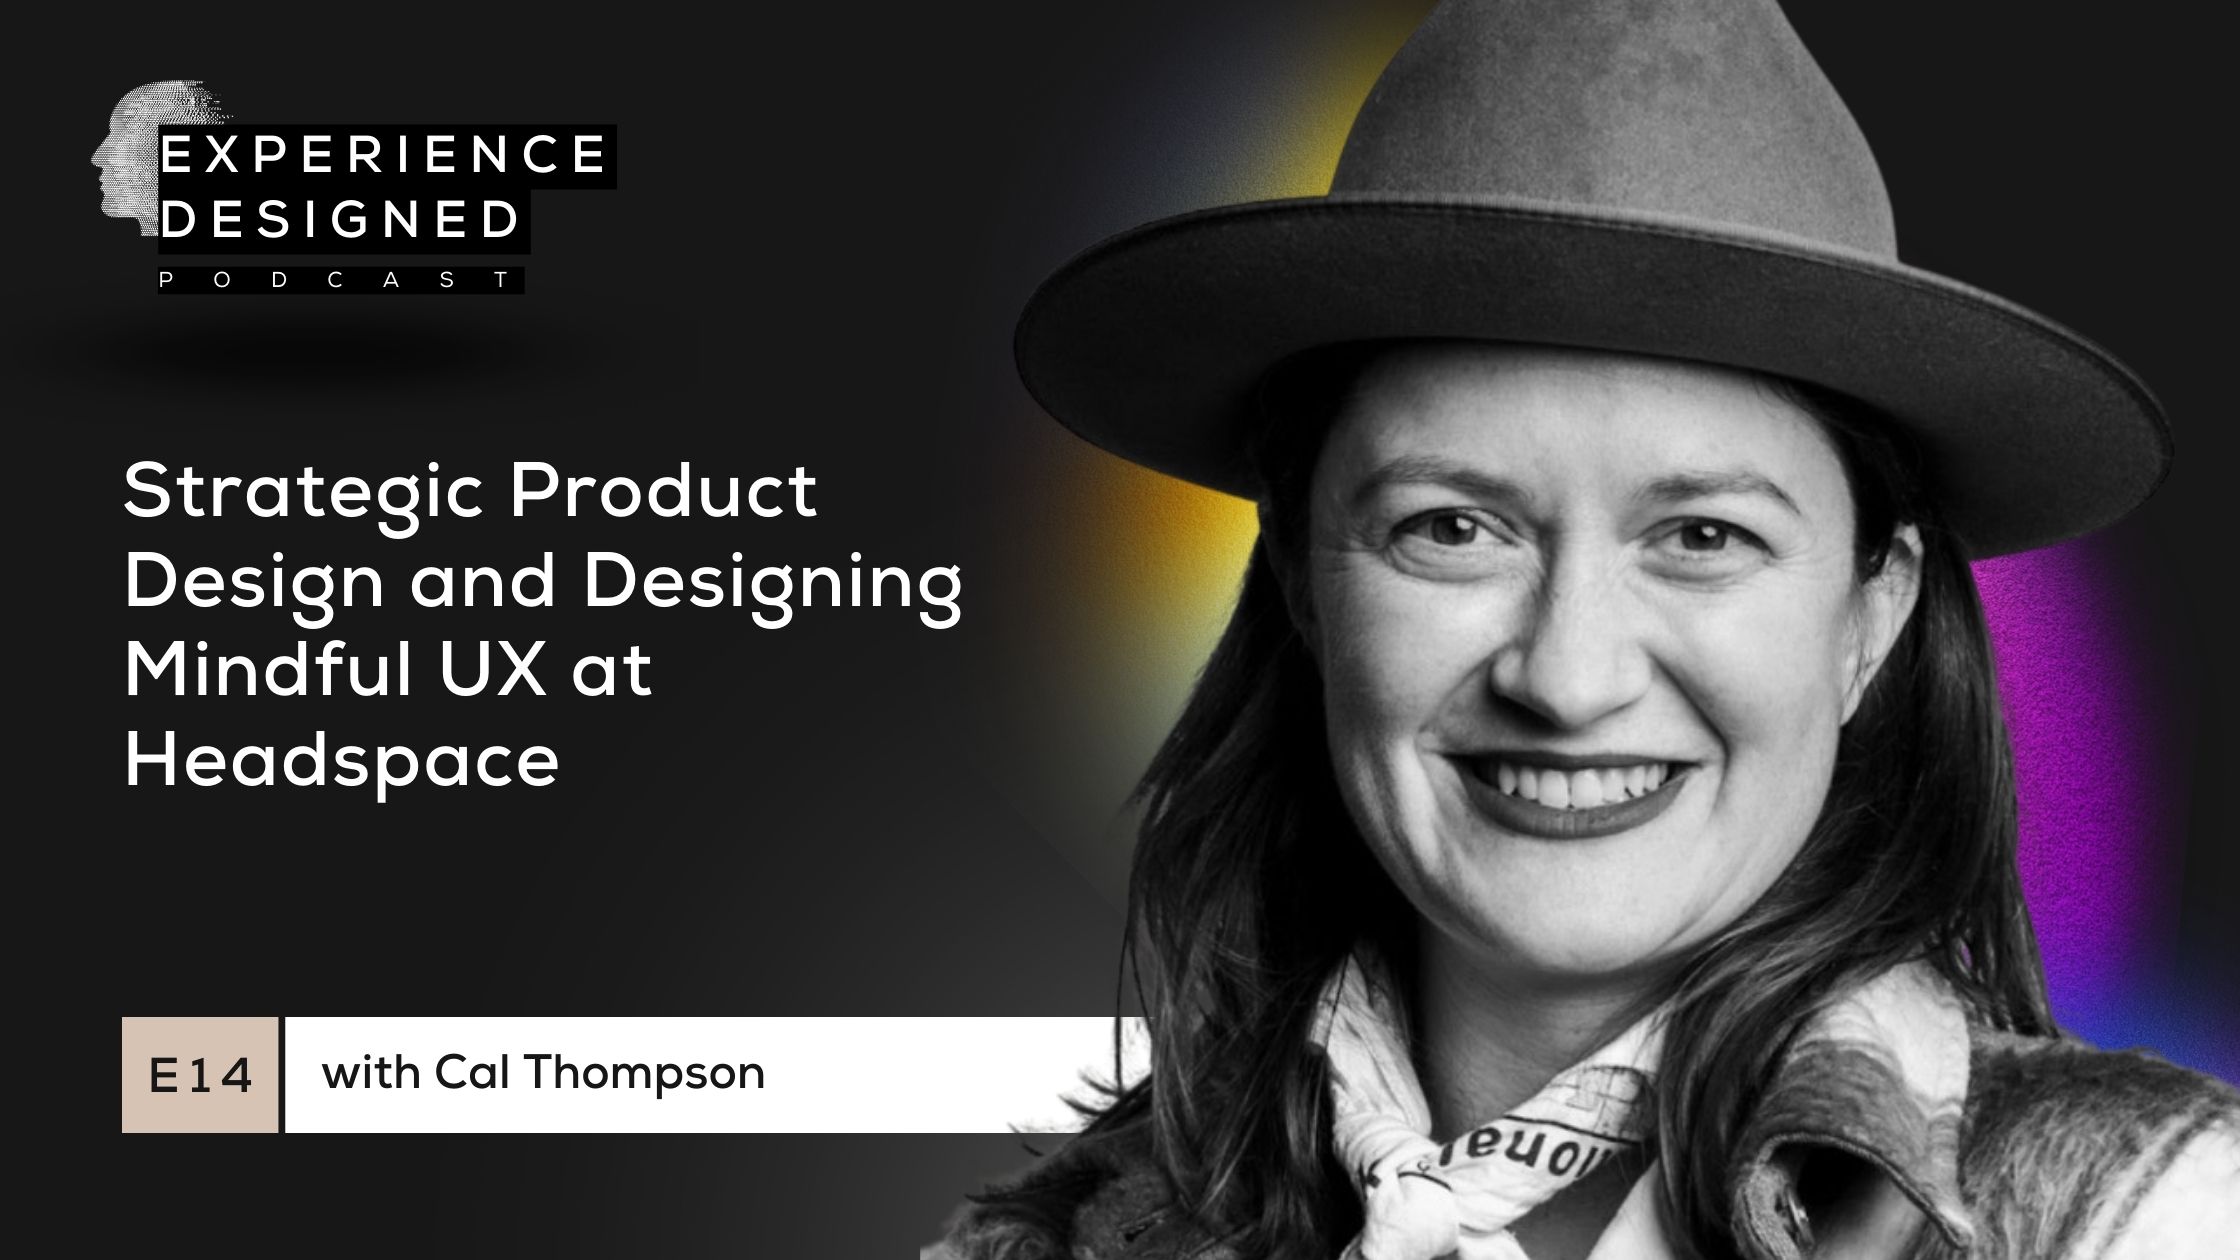 Cal Thompson⁠ (they/them) is a design leader and the VP of User Experience at Headspace. They are leading a talented and mindful team of researchers and designers. Cal has extensive experience working with emerging tech, enterprise and customer experience challenges.